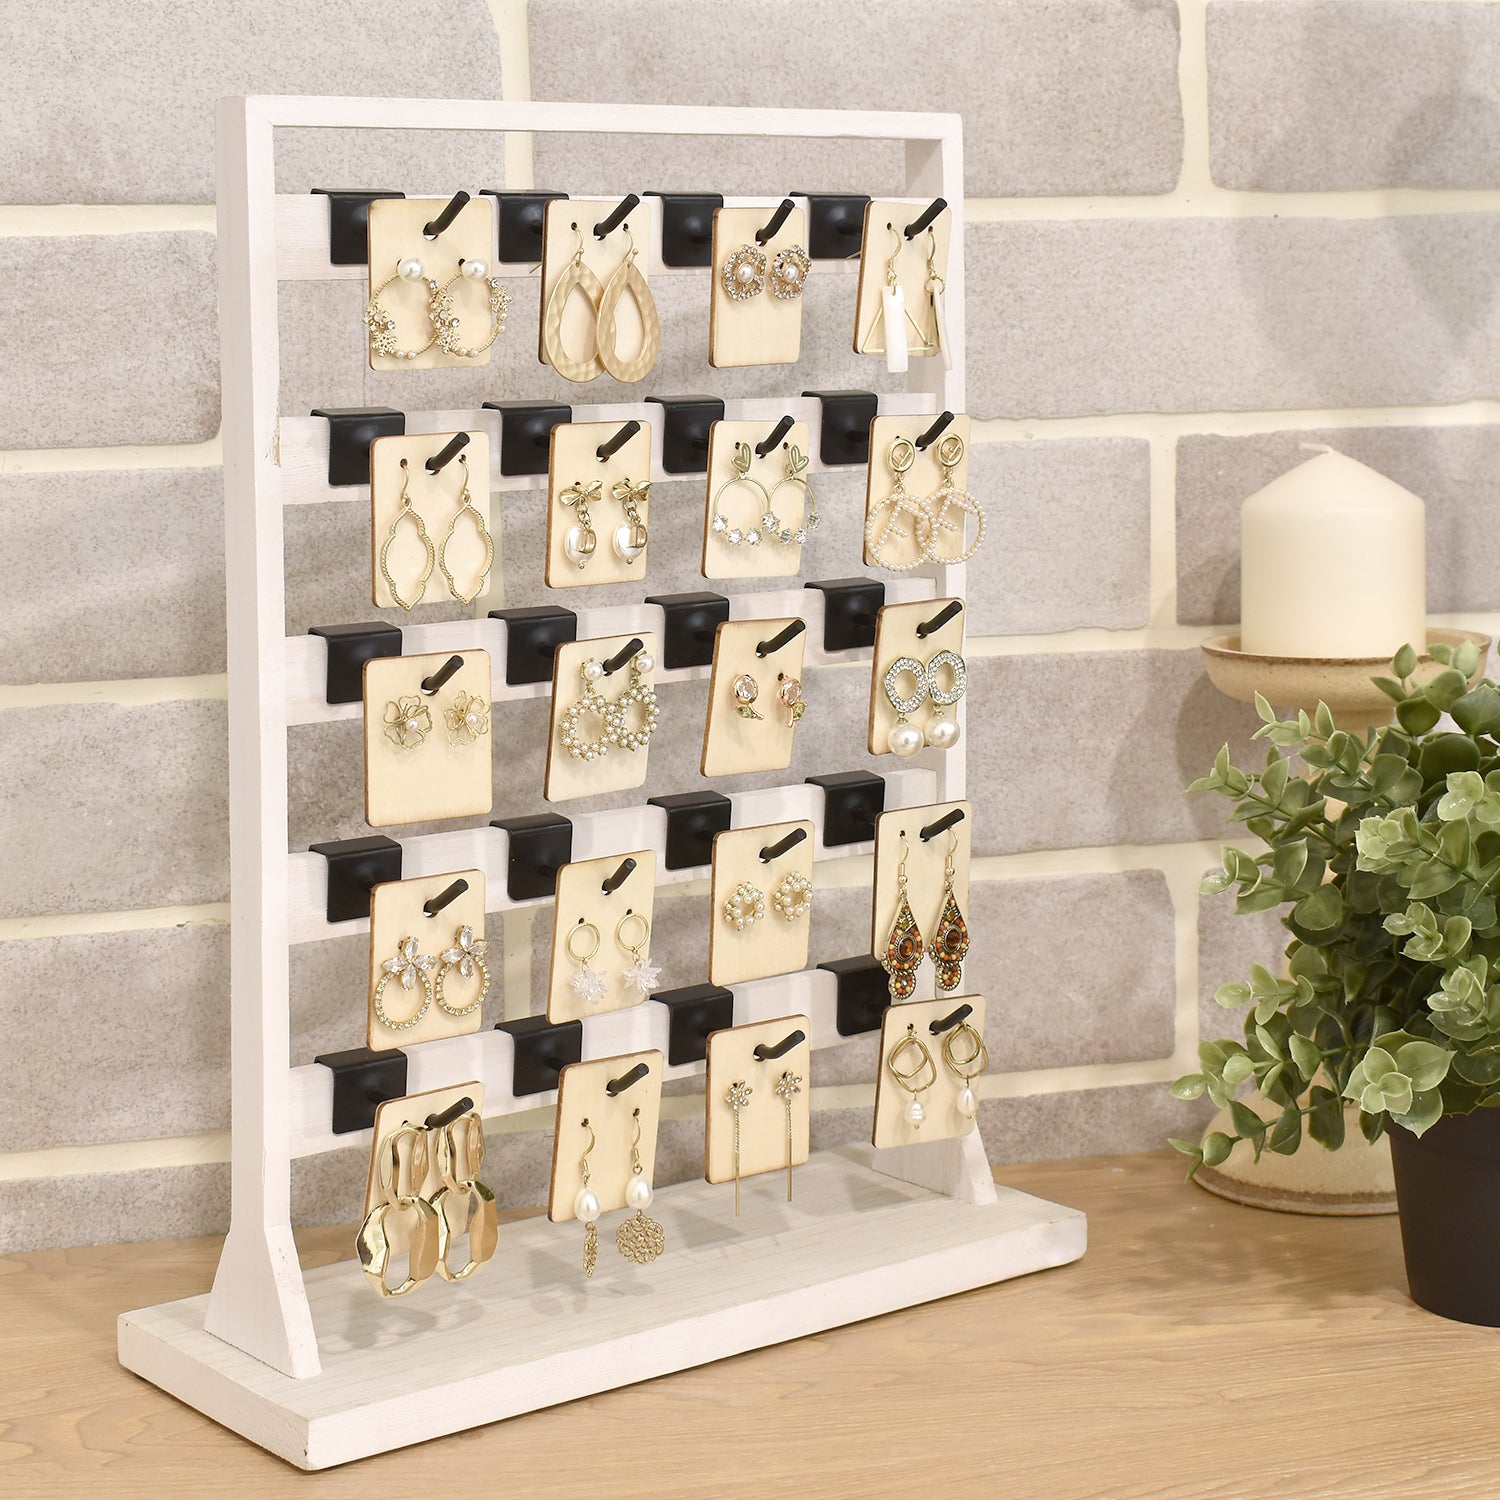  Ikee Design Wooden Jewelry Display Rack with 20 Removable Metal  Hooks, Earring Card Display Holder Stand with Hooks, Jewelry Tower for  Earring Cards, Necklaces, Keychains, Coffee Color : Clothing, Shoes 